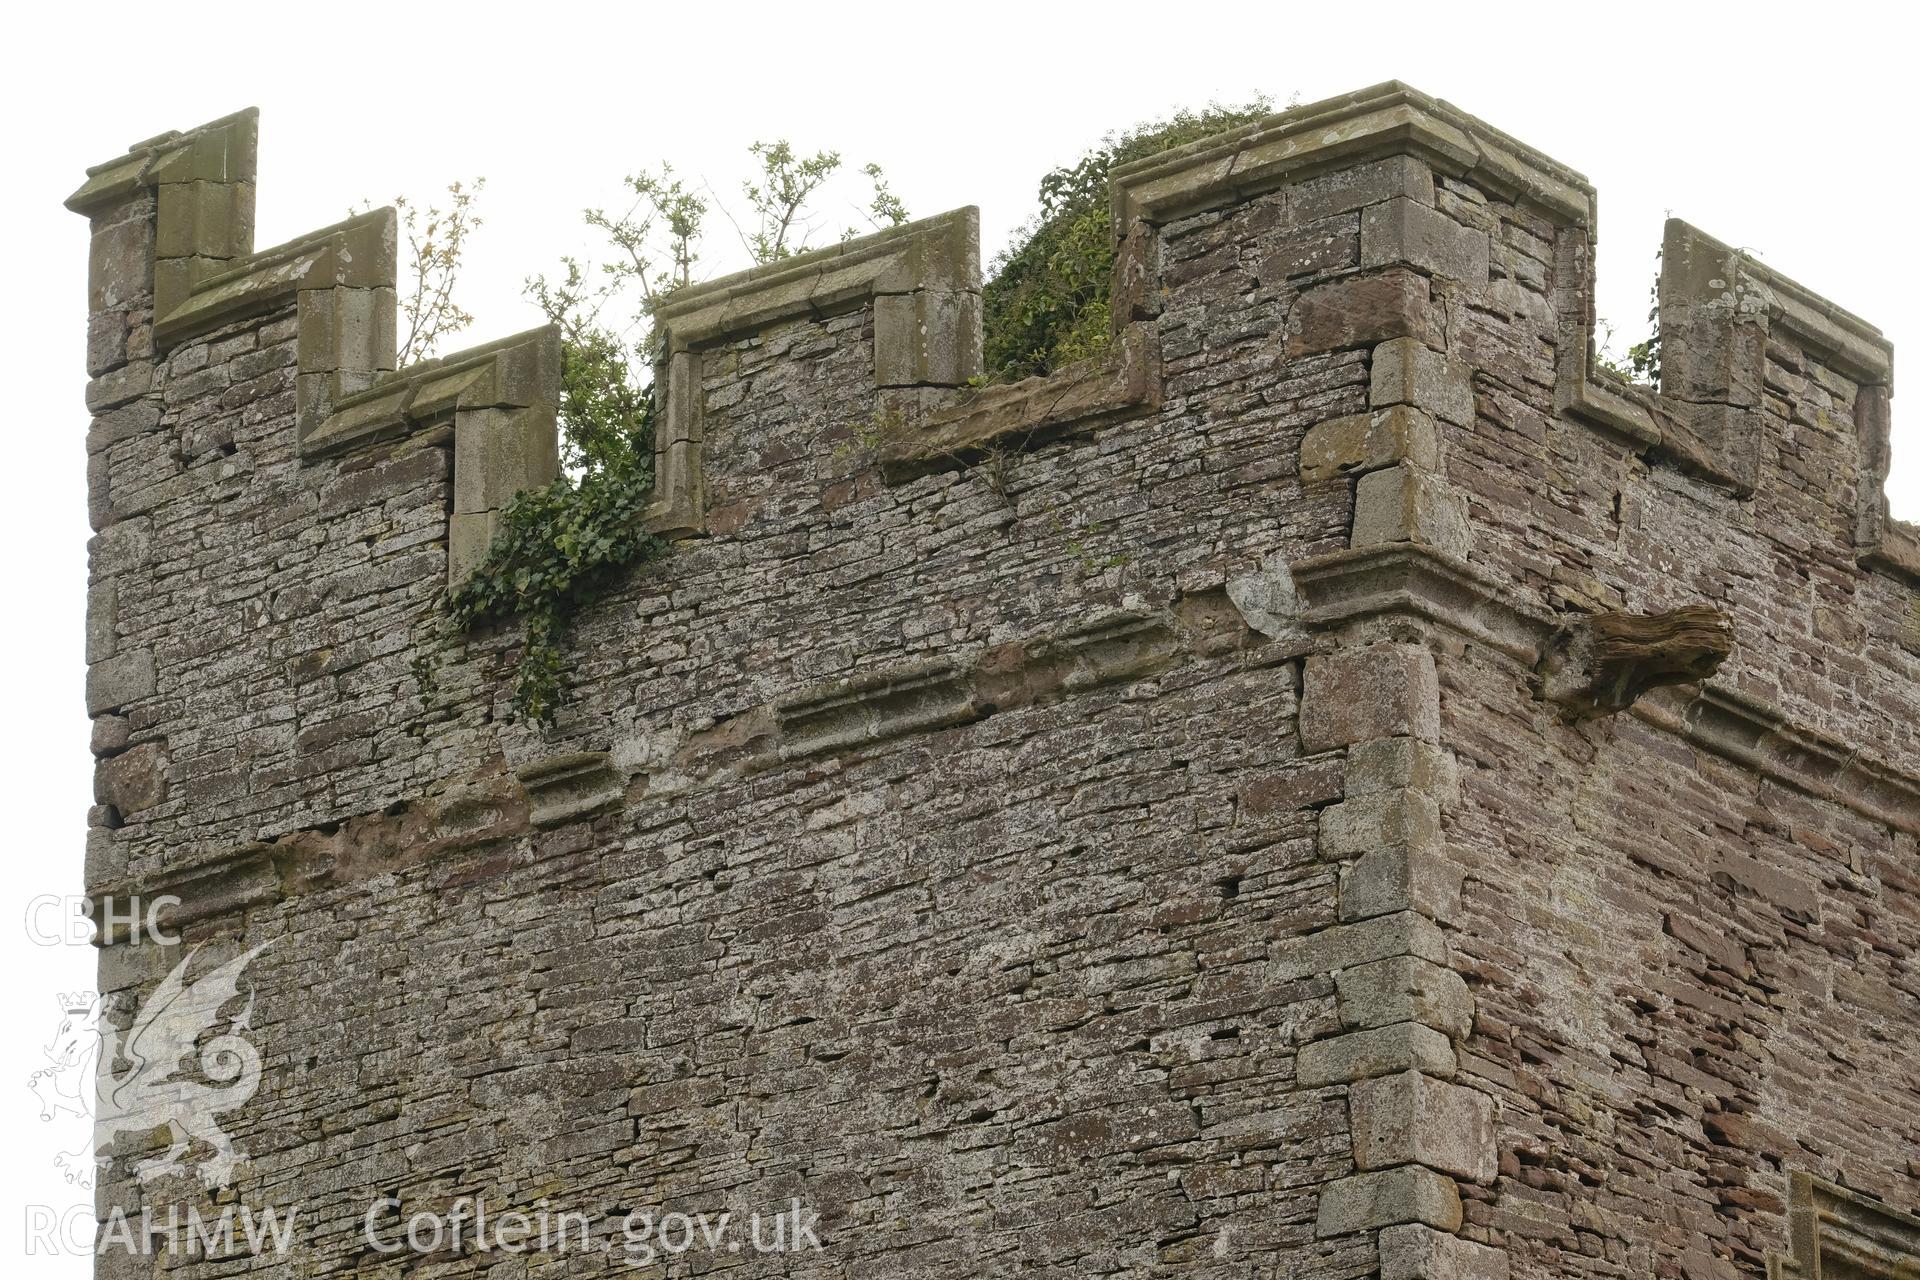 Colour photograph showing Great Porthmel Gatehouse - parapet, NE front, looking S. Produced as part of Historic Building Recording for Great Porthamel Gatehouse, carried out by Richard Hayman, April 2021.